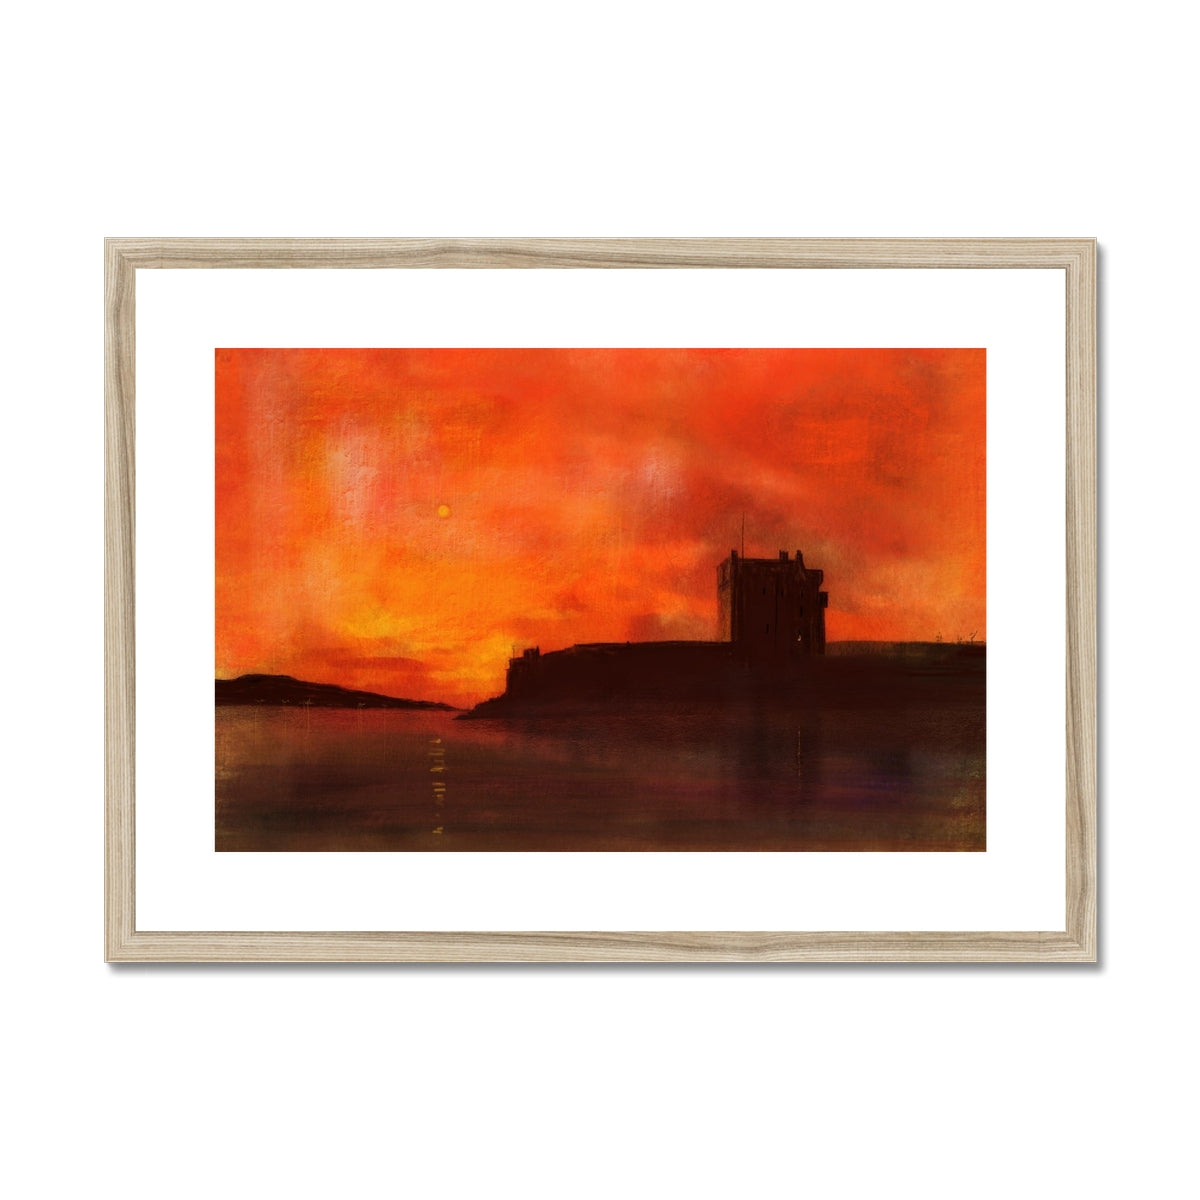 Broughty Castle Sunset Painting | Framed & Mounted Prints From Scotland-Framed & Mounted Prints-Scottish Castles Art Gallery-A2 Landscape-Natural Frame-Paintings, Prints, Homeware, Art Gifts From Scotland By Scottish Artist Kevin Hunter